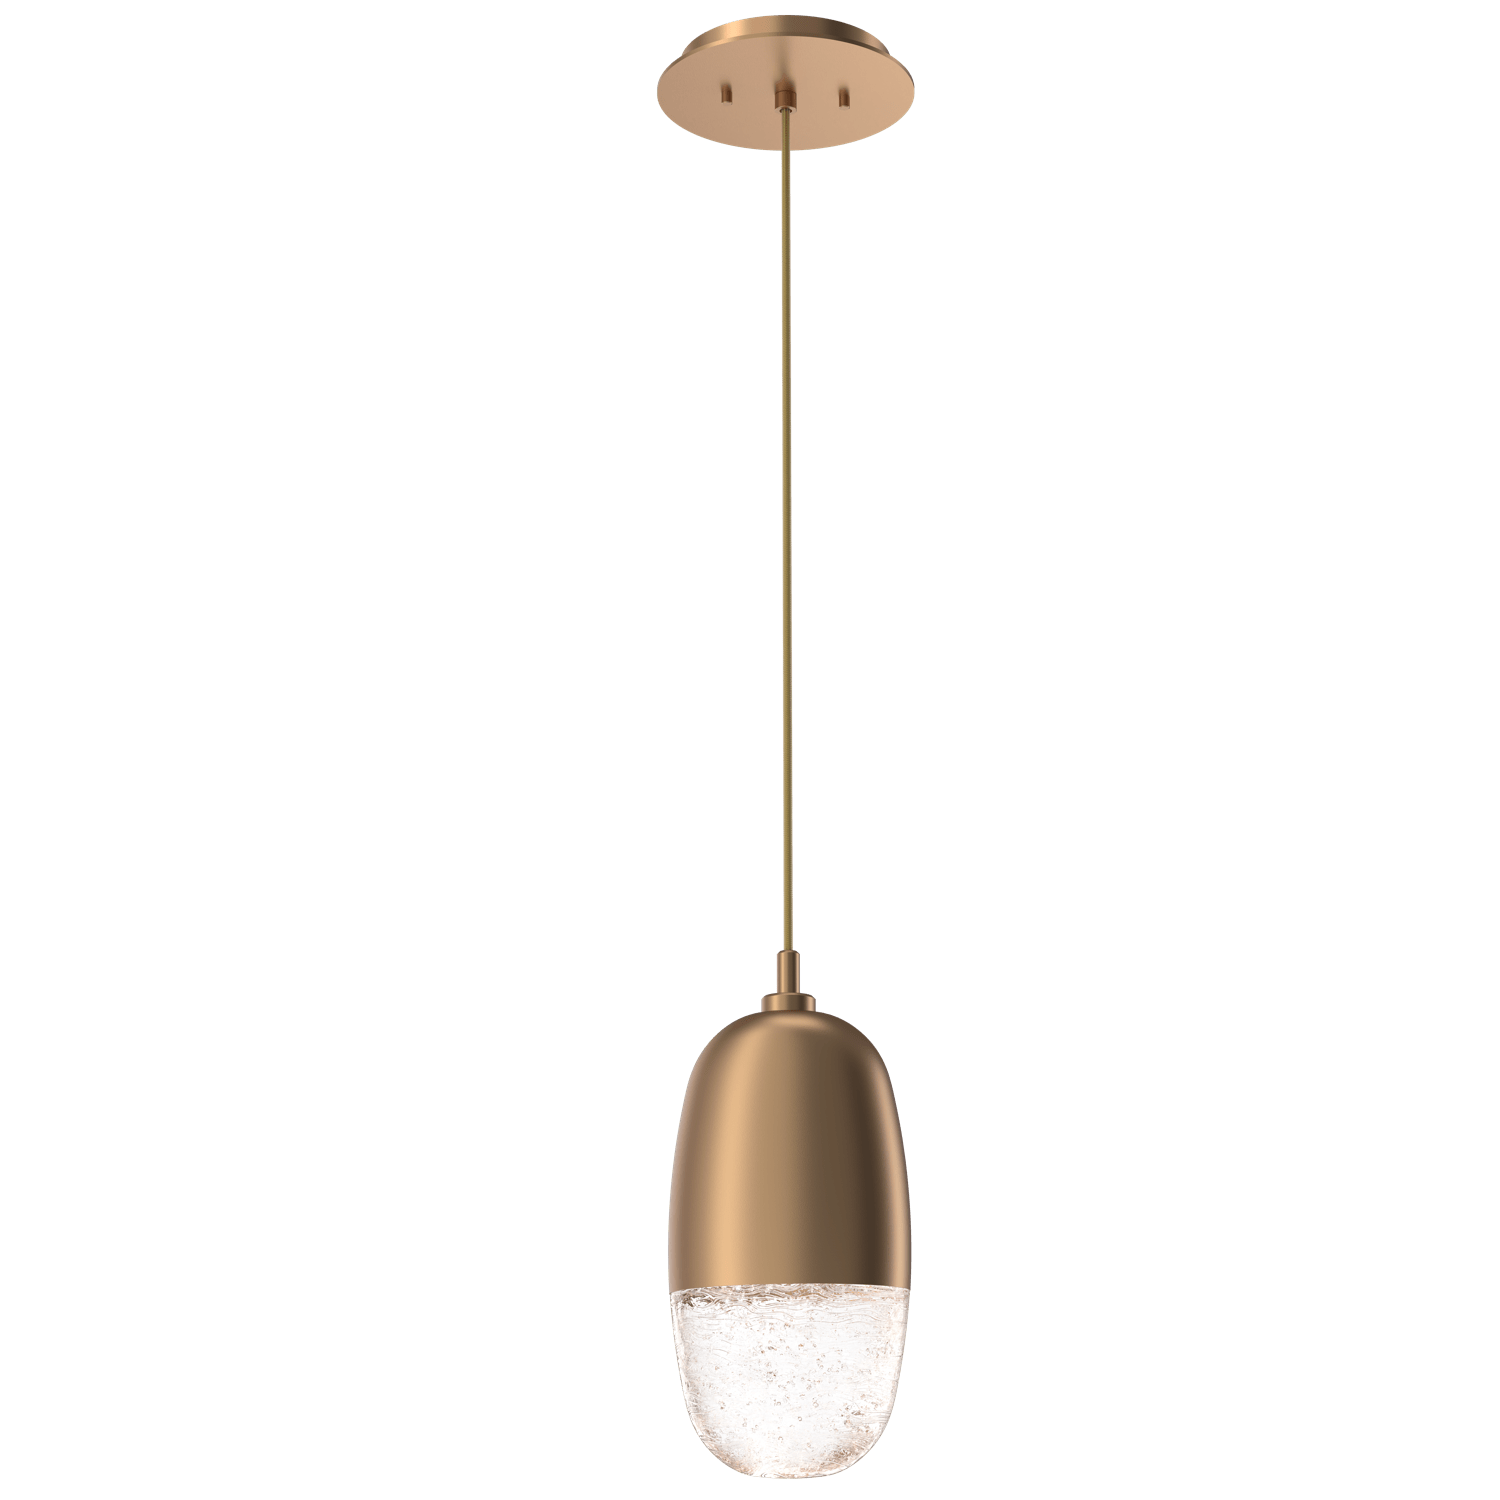 LAB0079-01-NB-Hammerton-Studio-Pebble-pendant-light-with-novel-brass-finish-and-clear-cast-glass-shades-and-LED-lamping